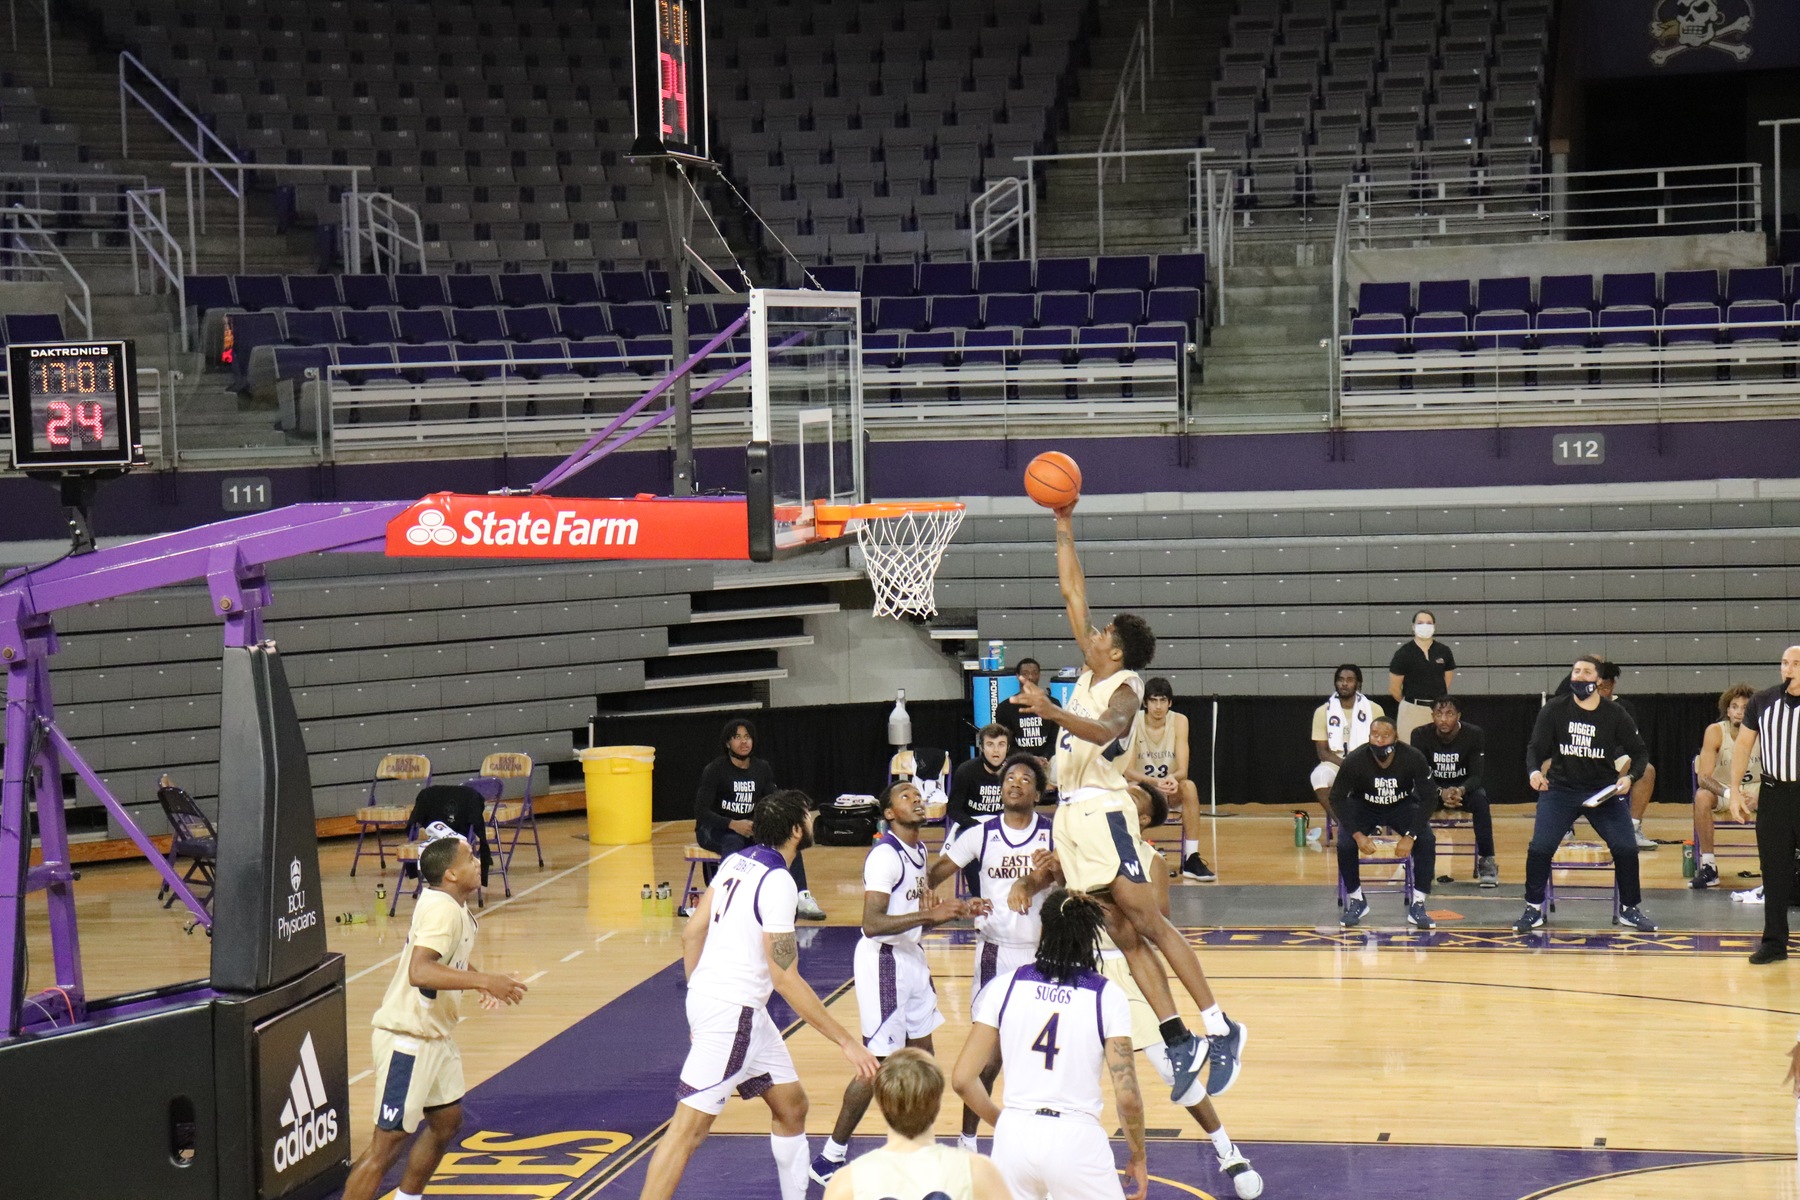 Junior Isaiah Lewis dunking on ECU, photo courtesy of Mike Armbruster